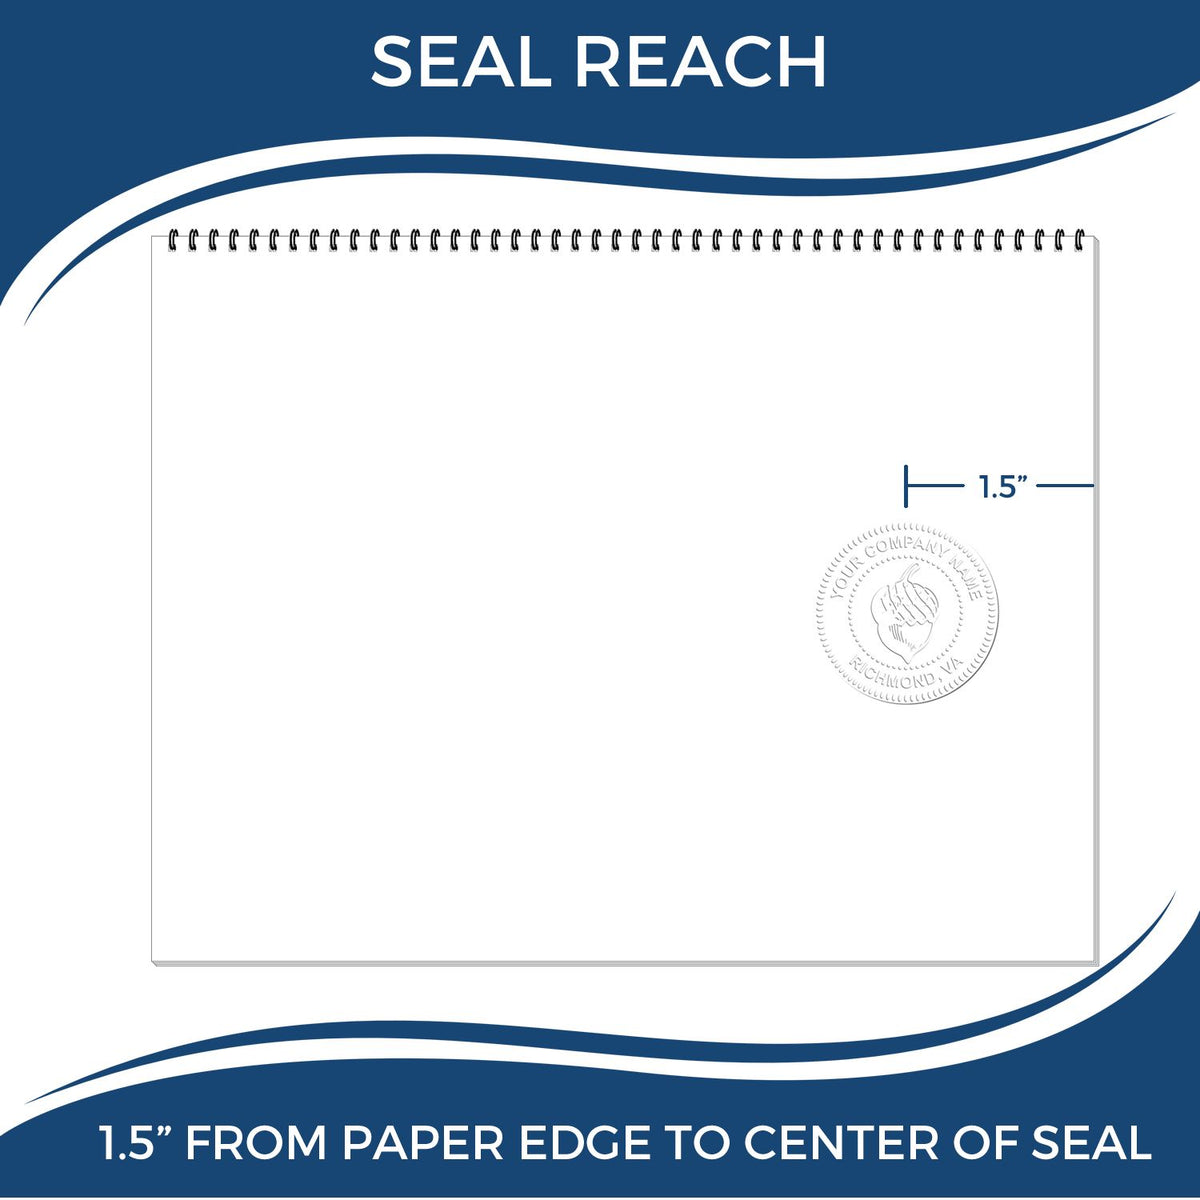 An infographic showing the seal reach which is represented by a ruler and a miniature seal image of the Hybrid Massachusetts Geologist Seal